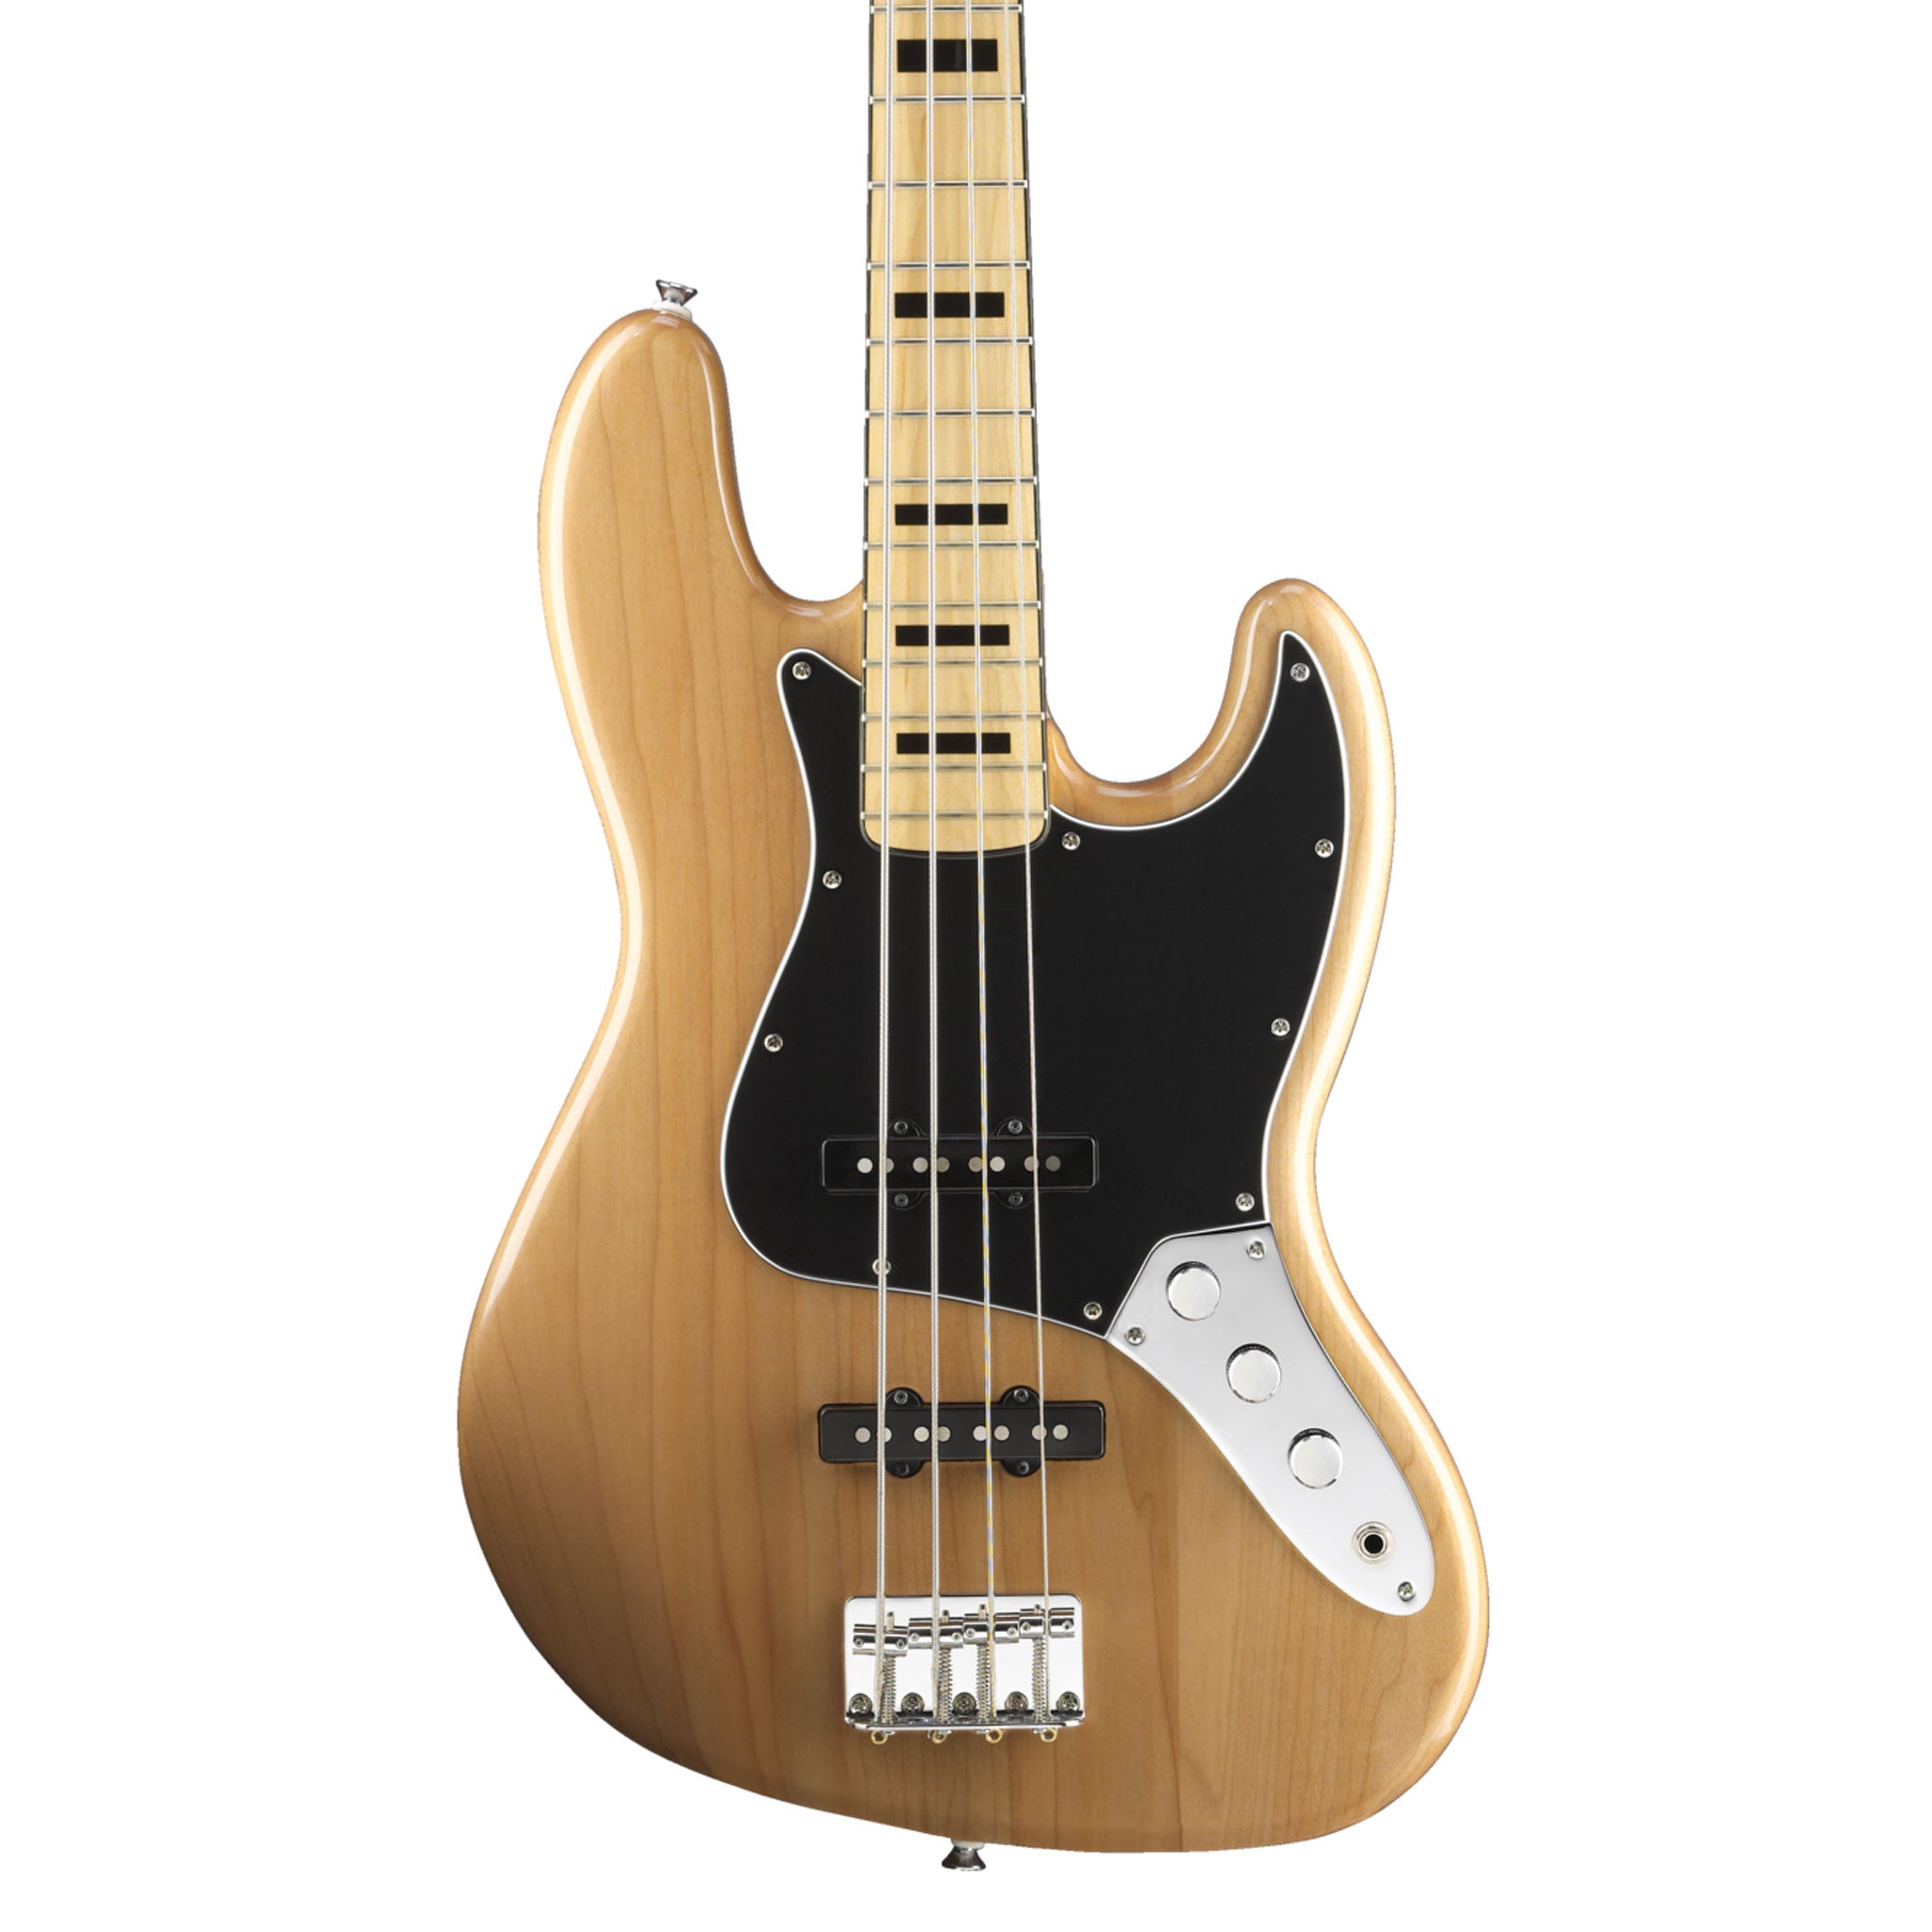 Squier - Vintage Modified Jazz Bass '70s - Natural